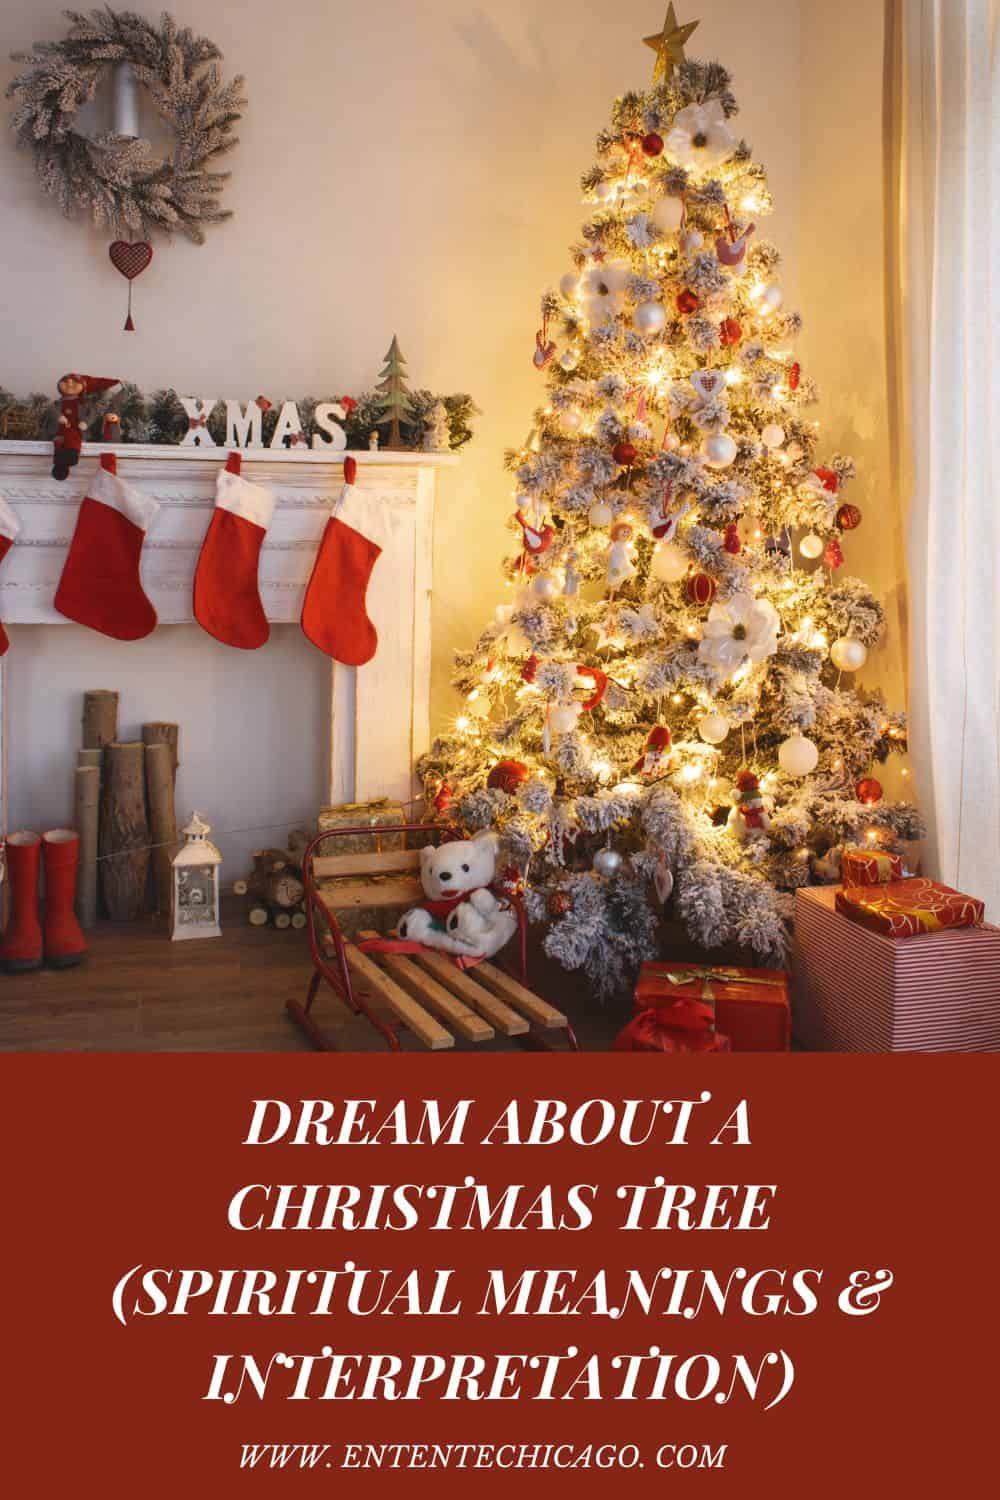 What Does It Mean To Dream About A Christmas Tree?